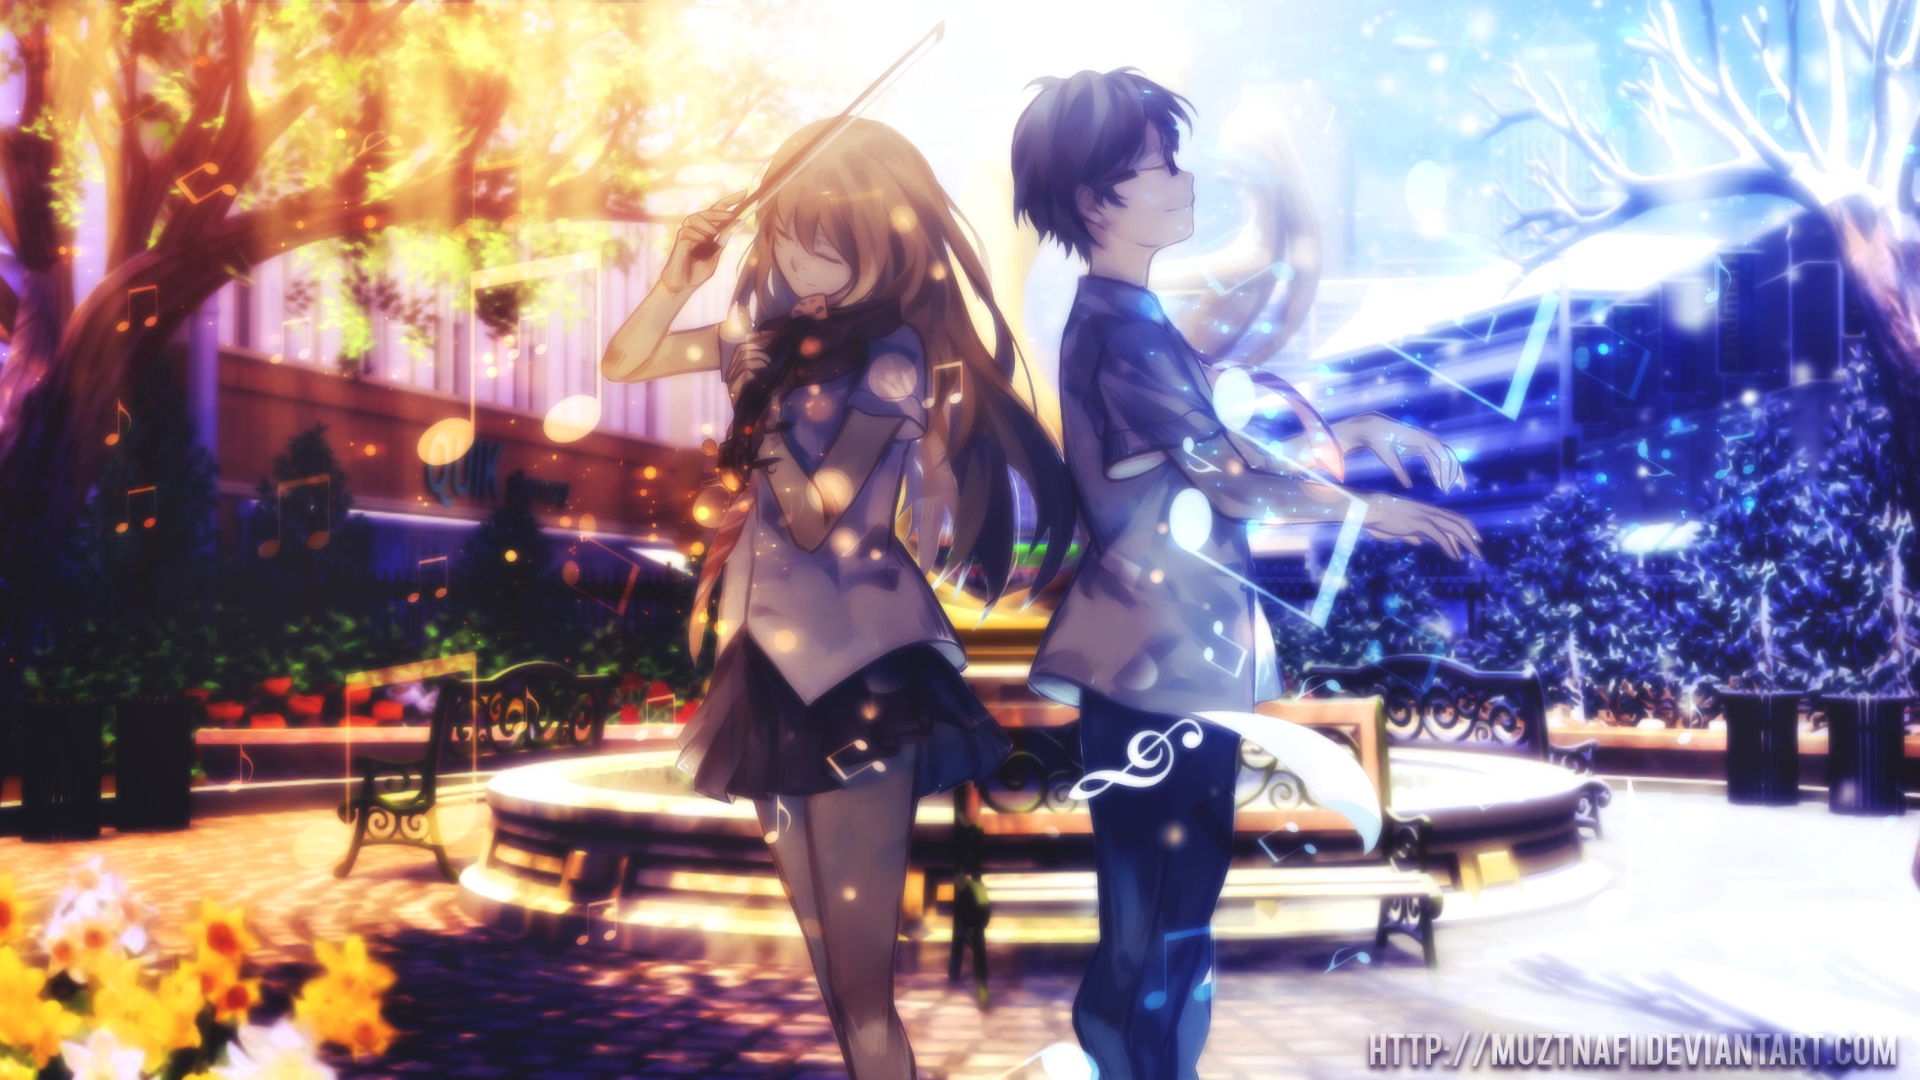 YOU'RE PRETTY GOOD  Your lie in april, Anime ost, Mystic wallpaper